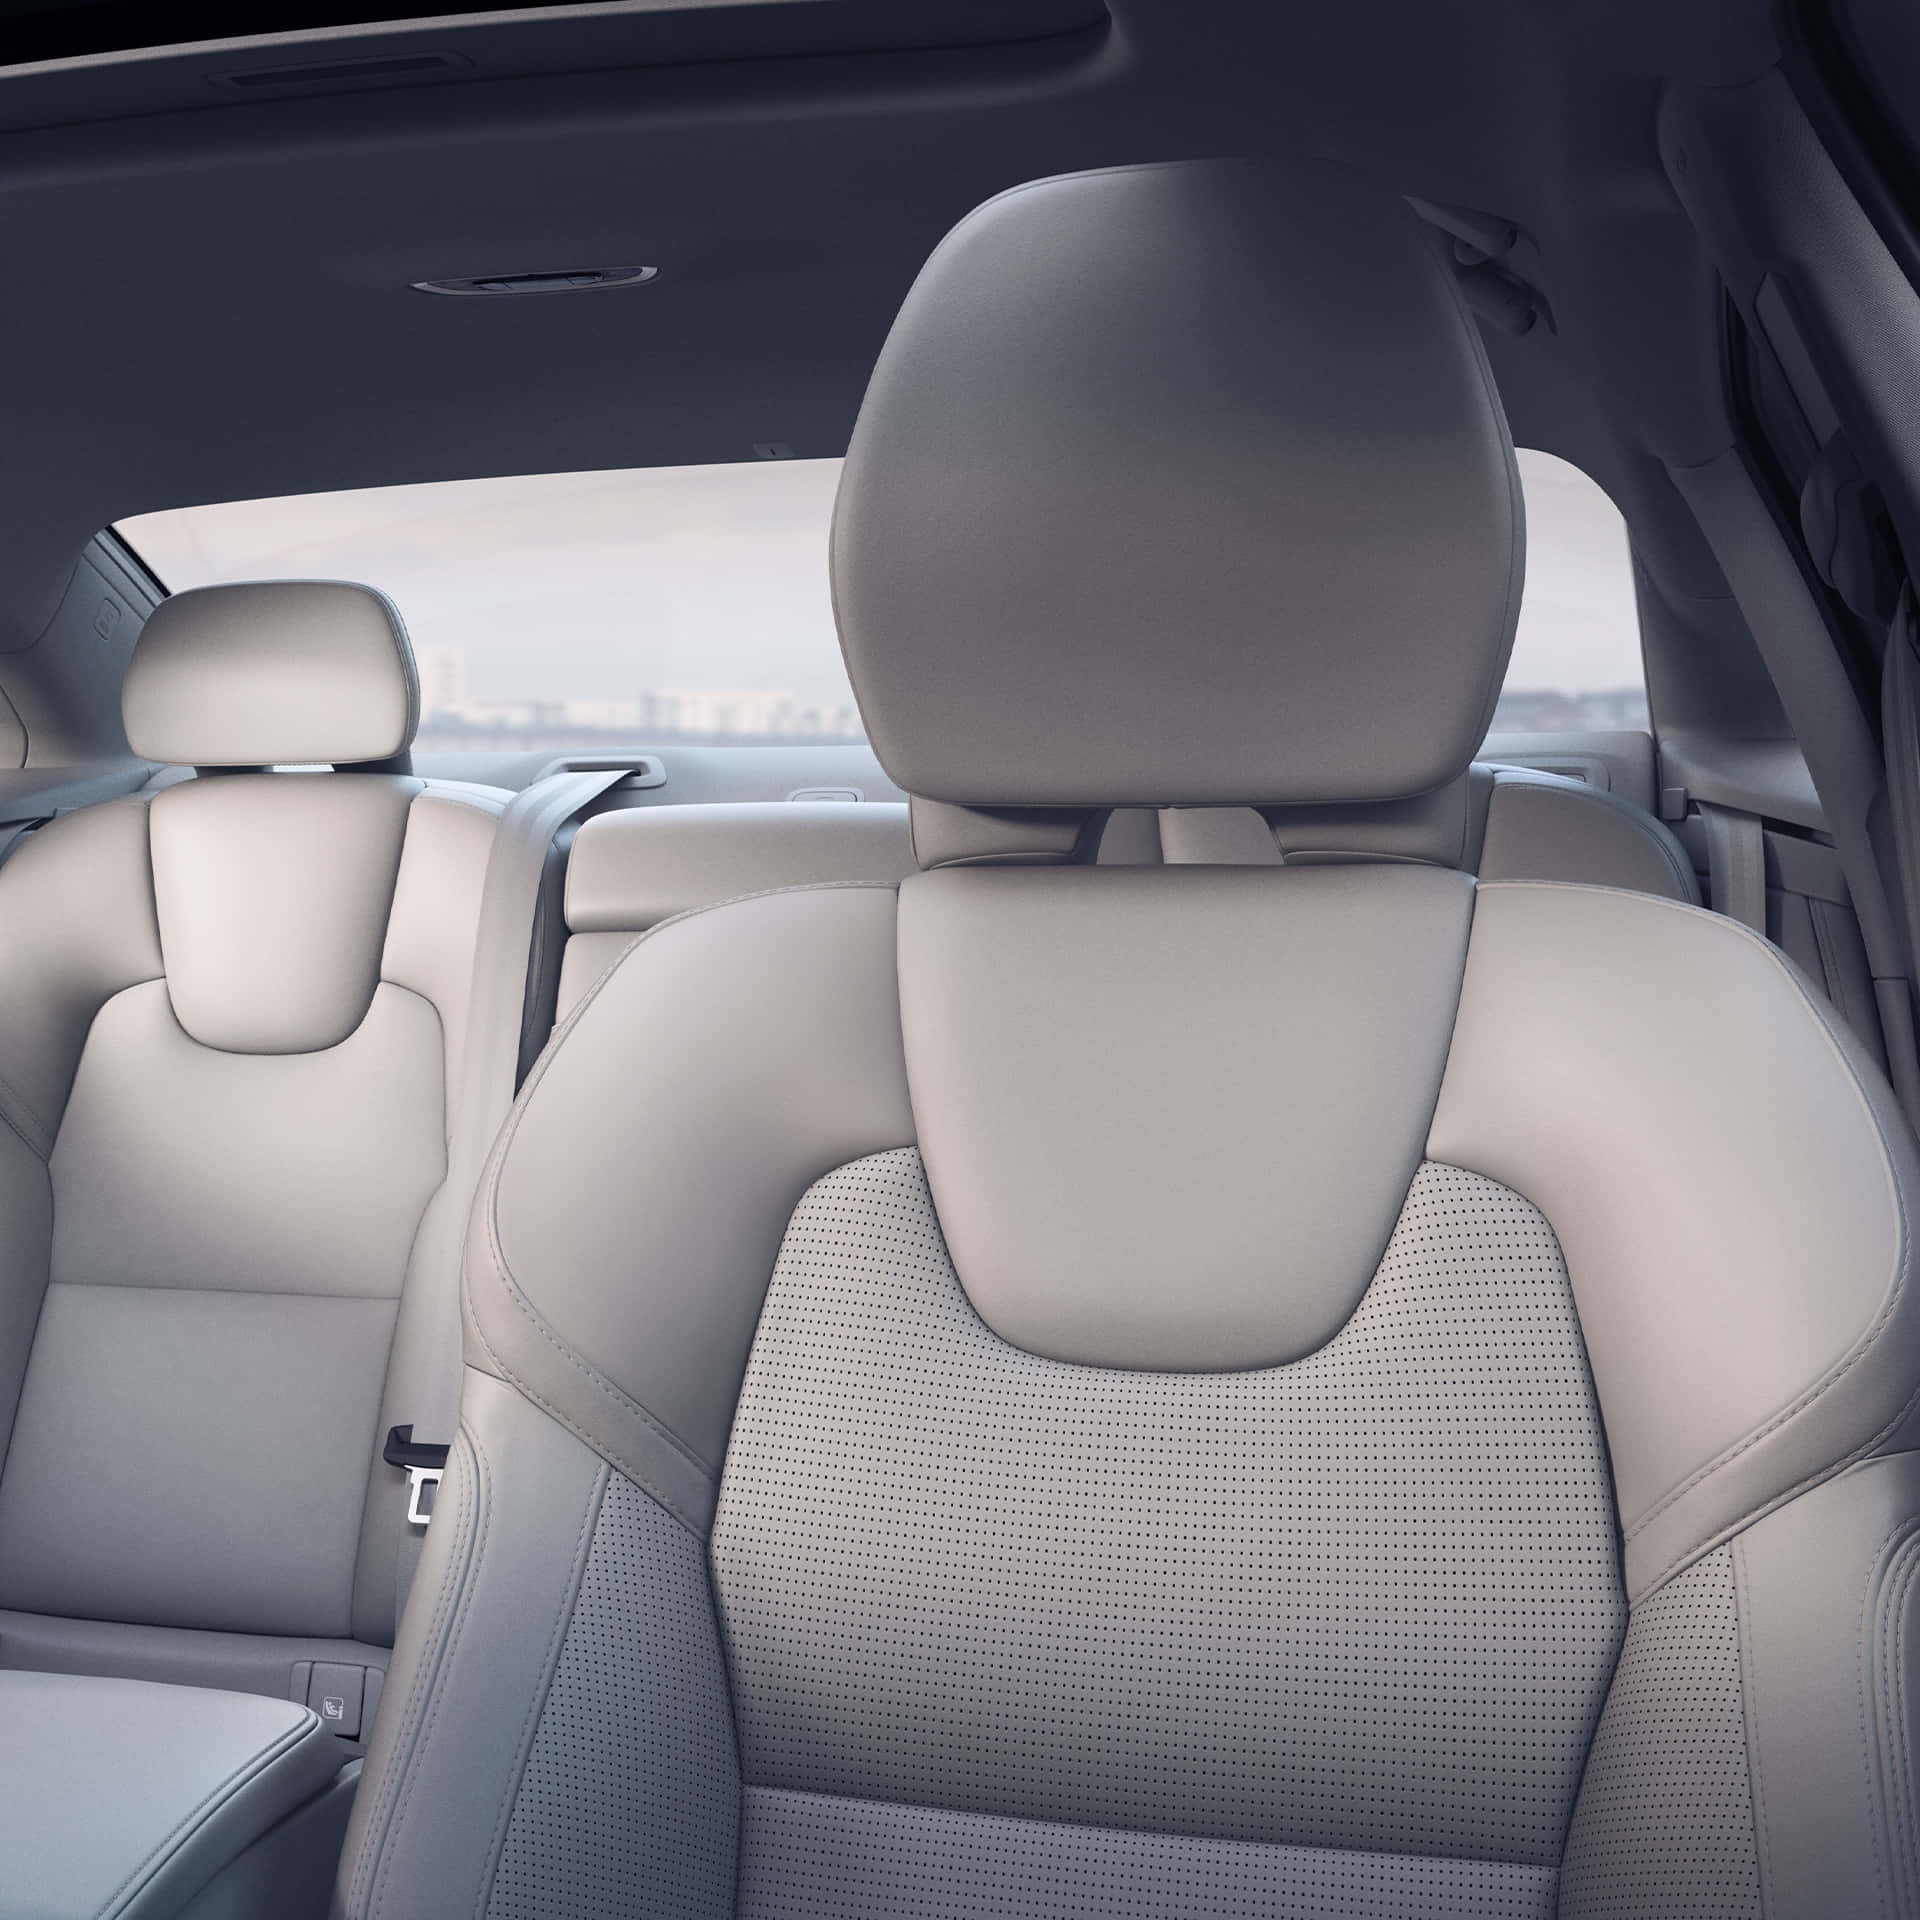 The Interior Of A Car With Grey Leather Seats Wallpaper